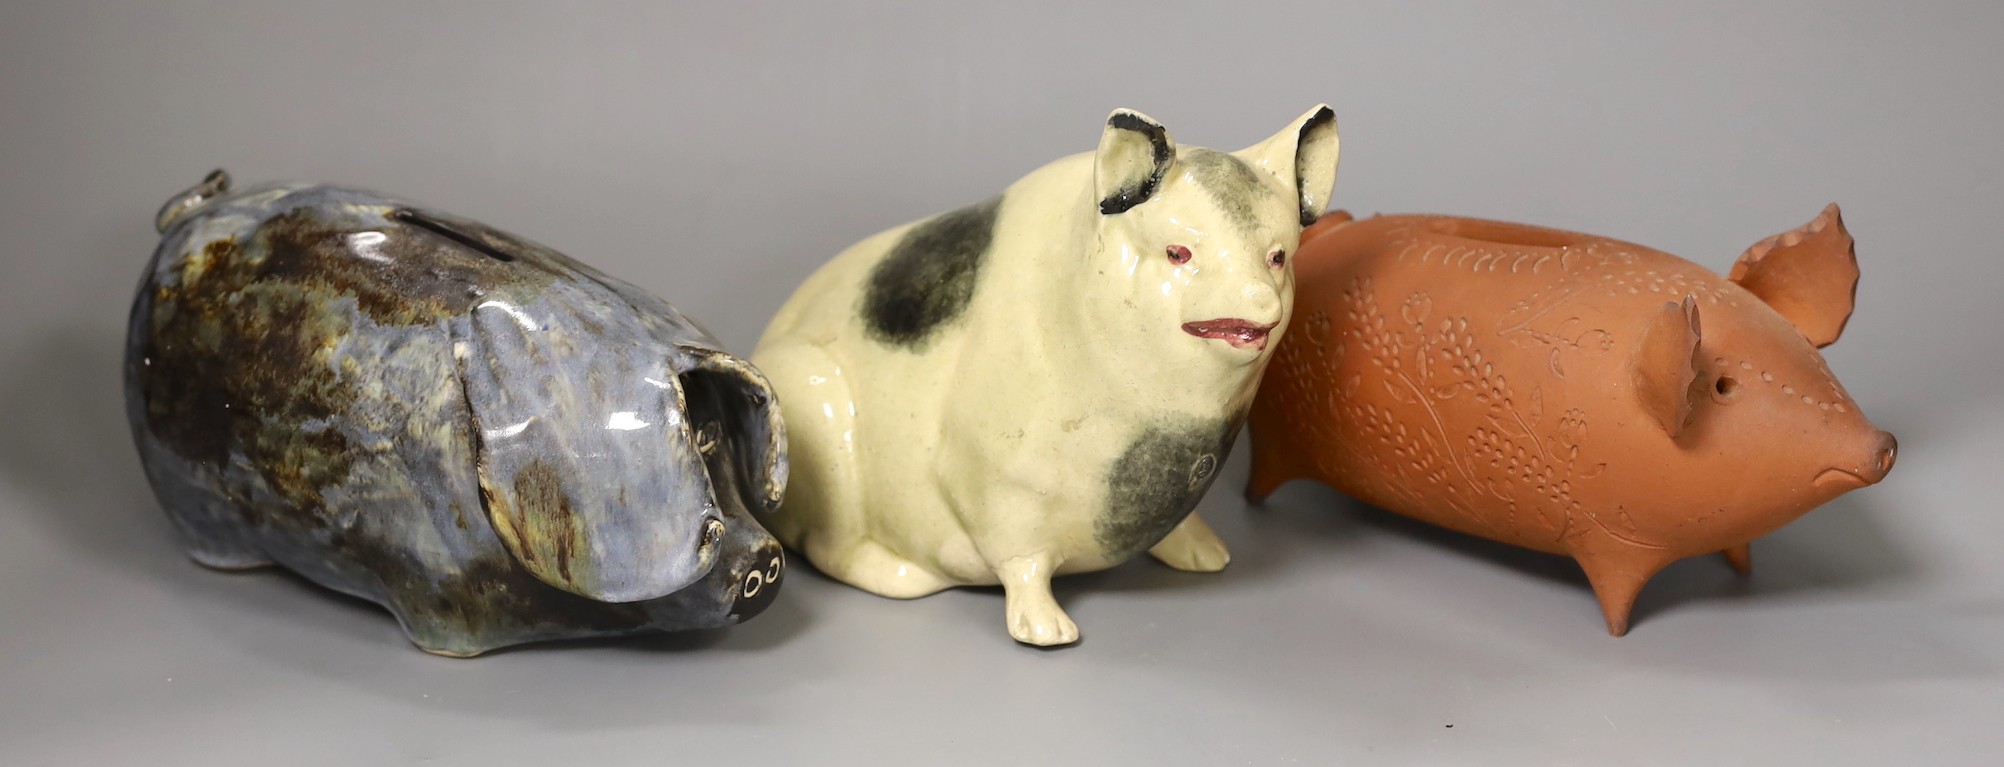 An early 20th century glazed pottery pig and 2 studio pottery pigs by Paul Whalley and Quinnett Rushett, tallest 15cm